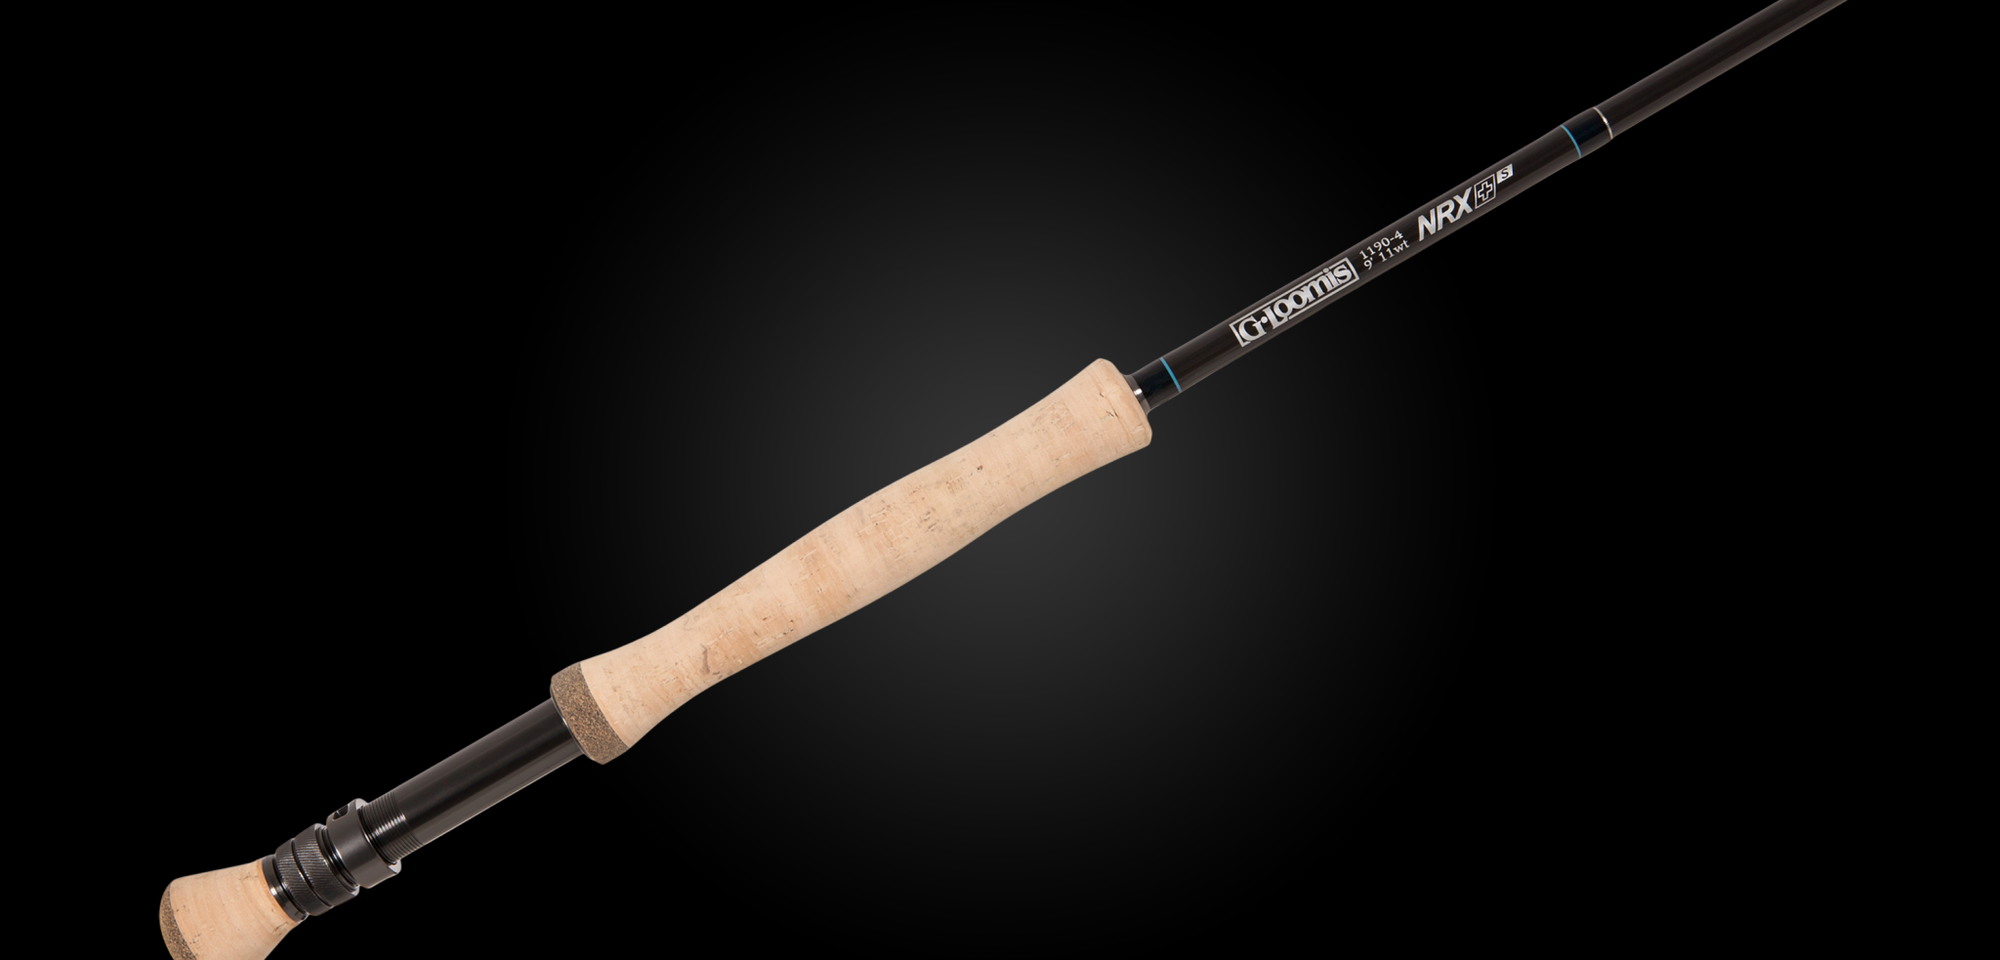 G. Loomis NRX+ Saltwater Fly Rod Review - Trident Fly Fishing